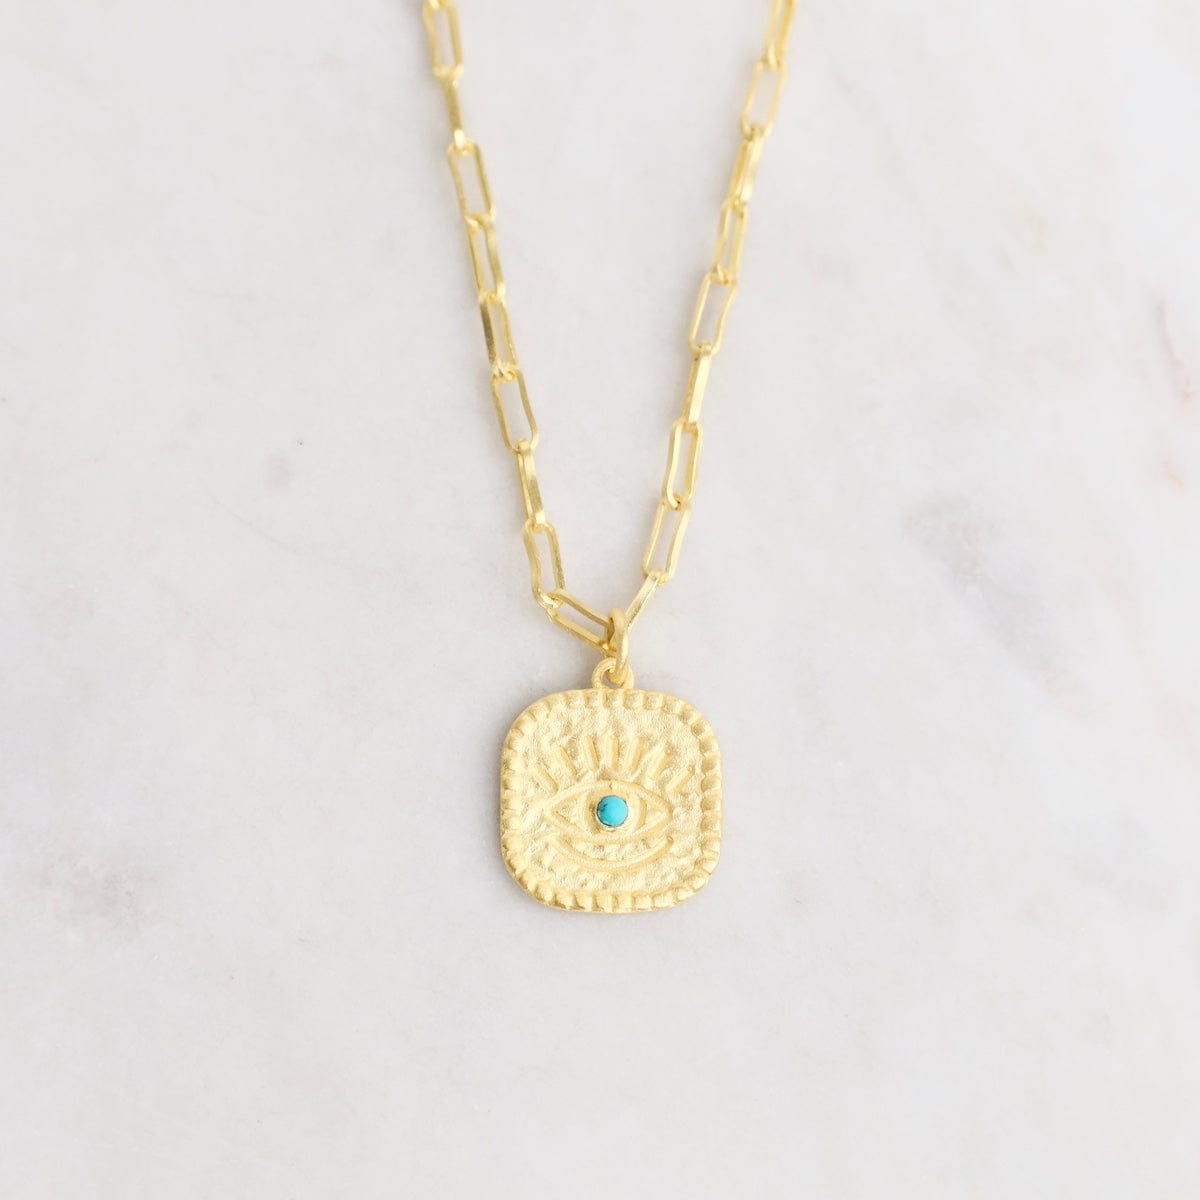 NKL-GPL Gold Square Turquoise Eye Pendant Necklace